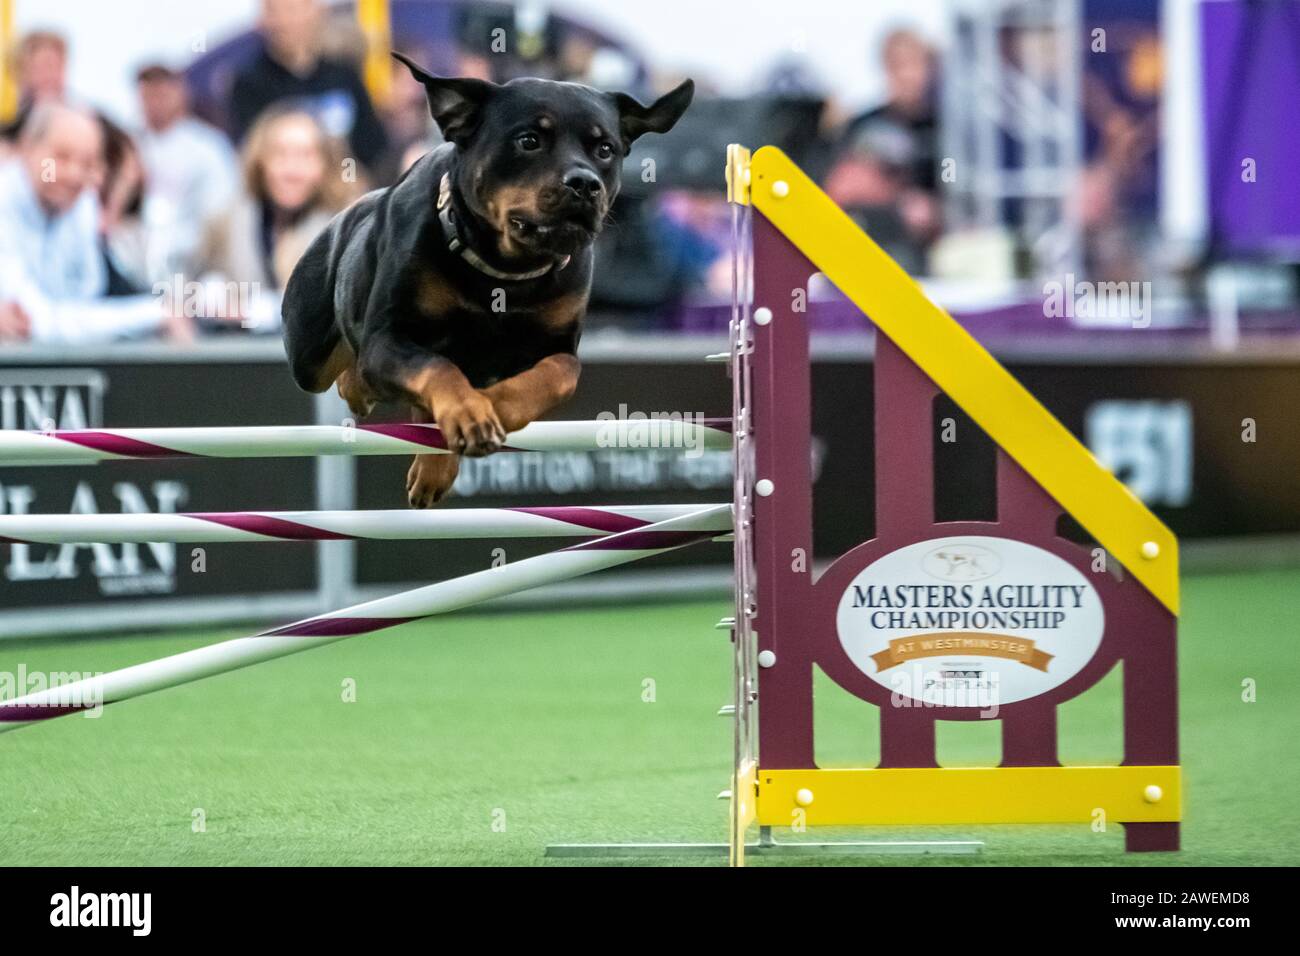 New York, USA. 8th Feb, 2020. Twix, a Rottweiler, clears an obstacle during the qualifying round of The Westminster Kennel Club Dog show Masters Agility Championship in New York city. Credit: Enrique Shore/Alamy Live News Stock Photo